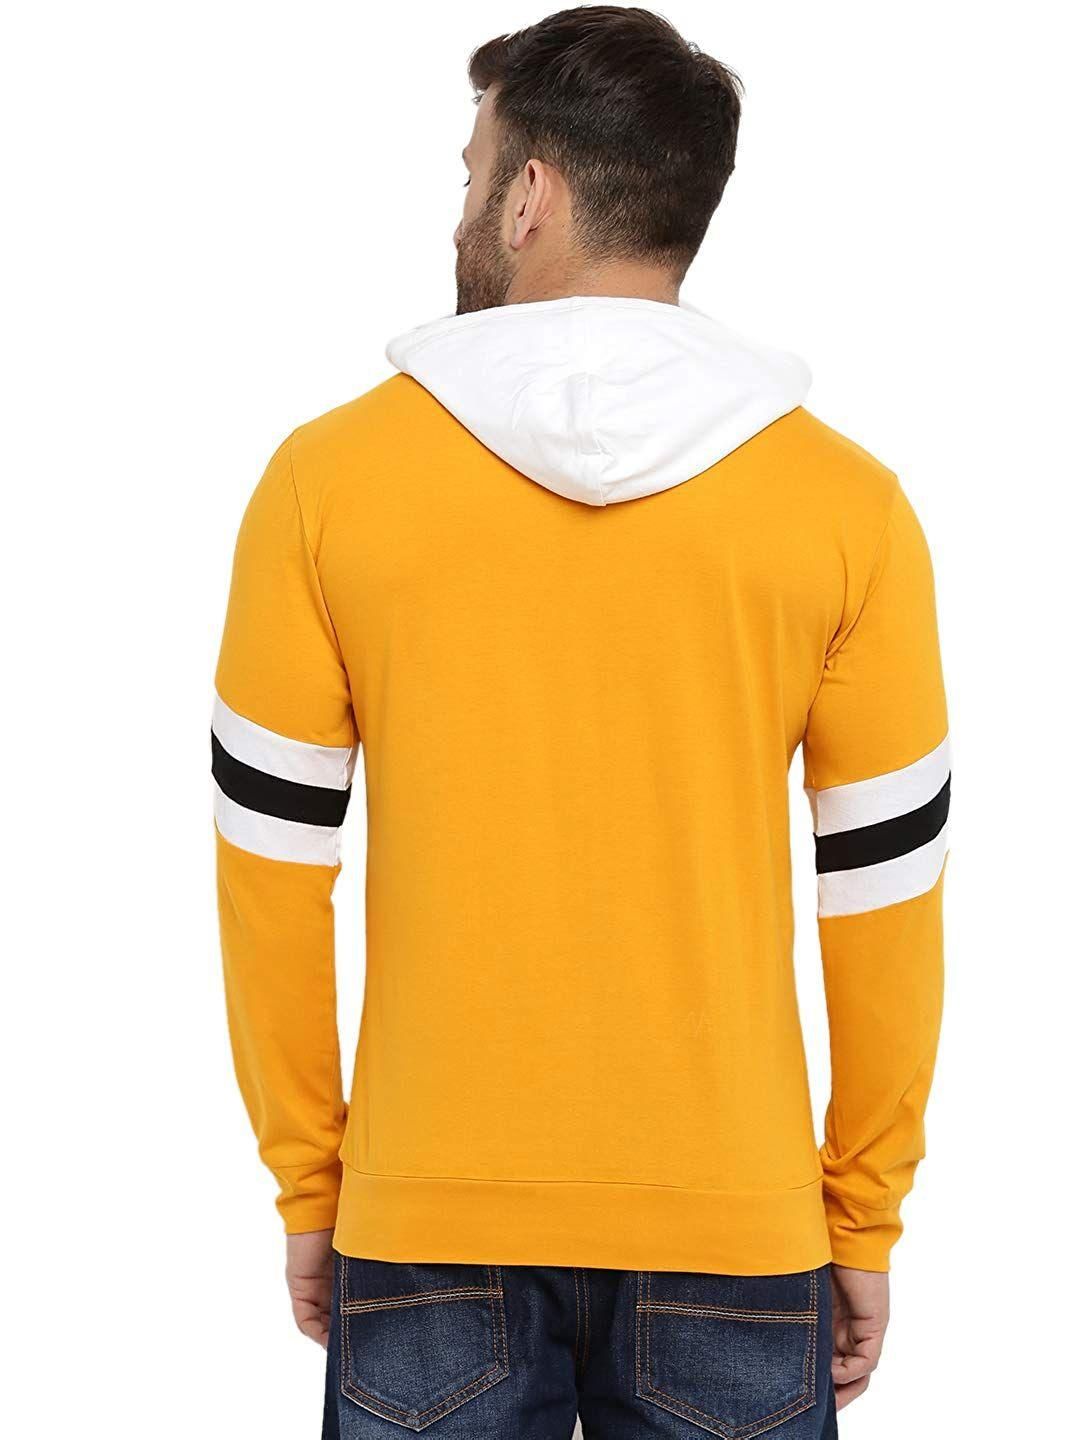 Cotton Solid Full Sleeves Hooded T-Shirt